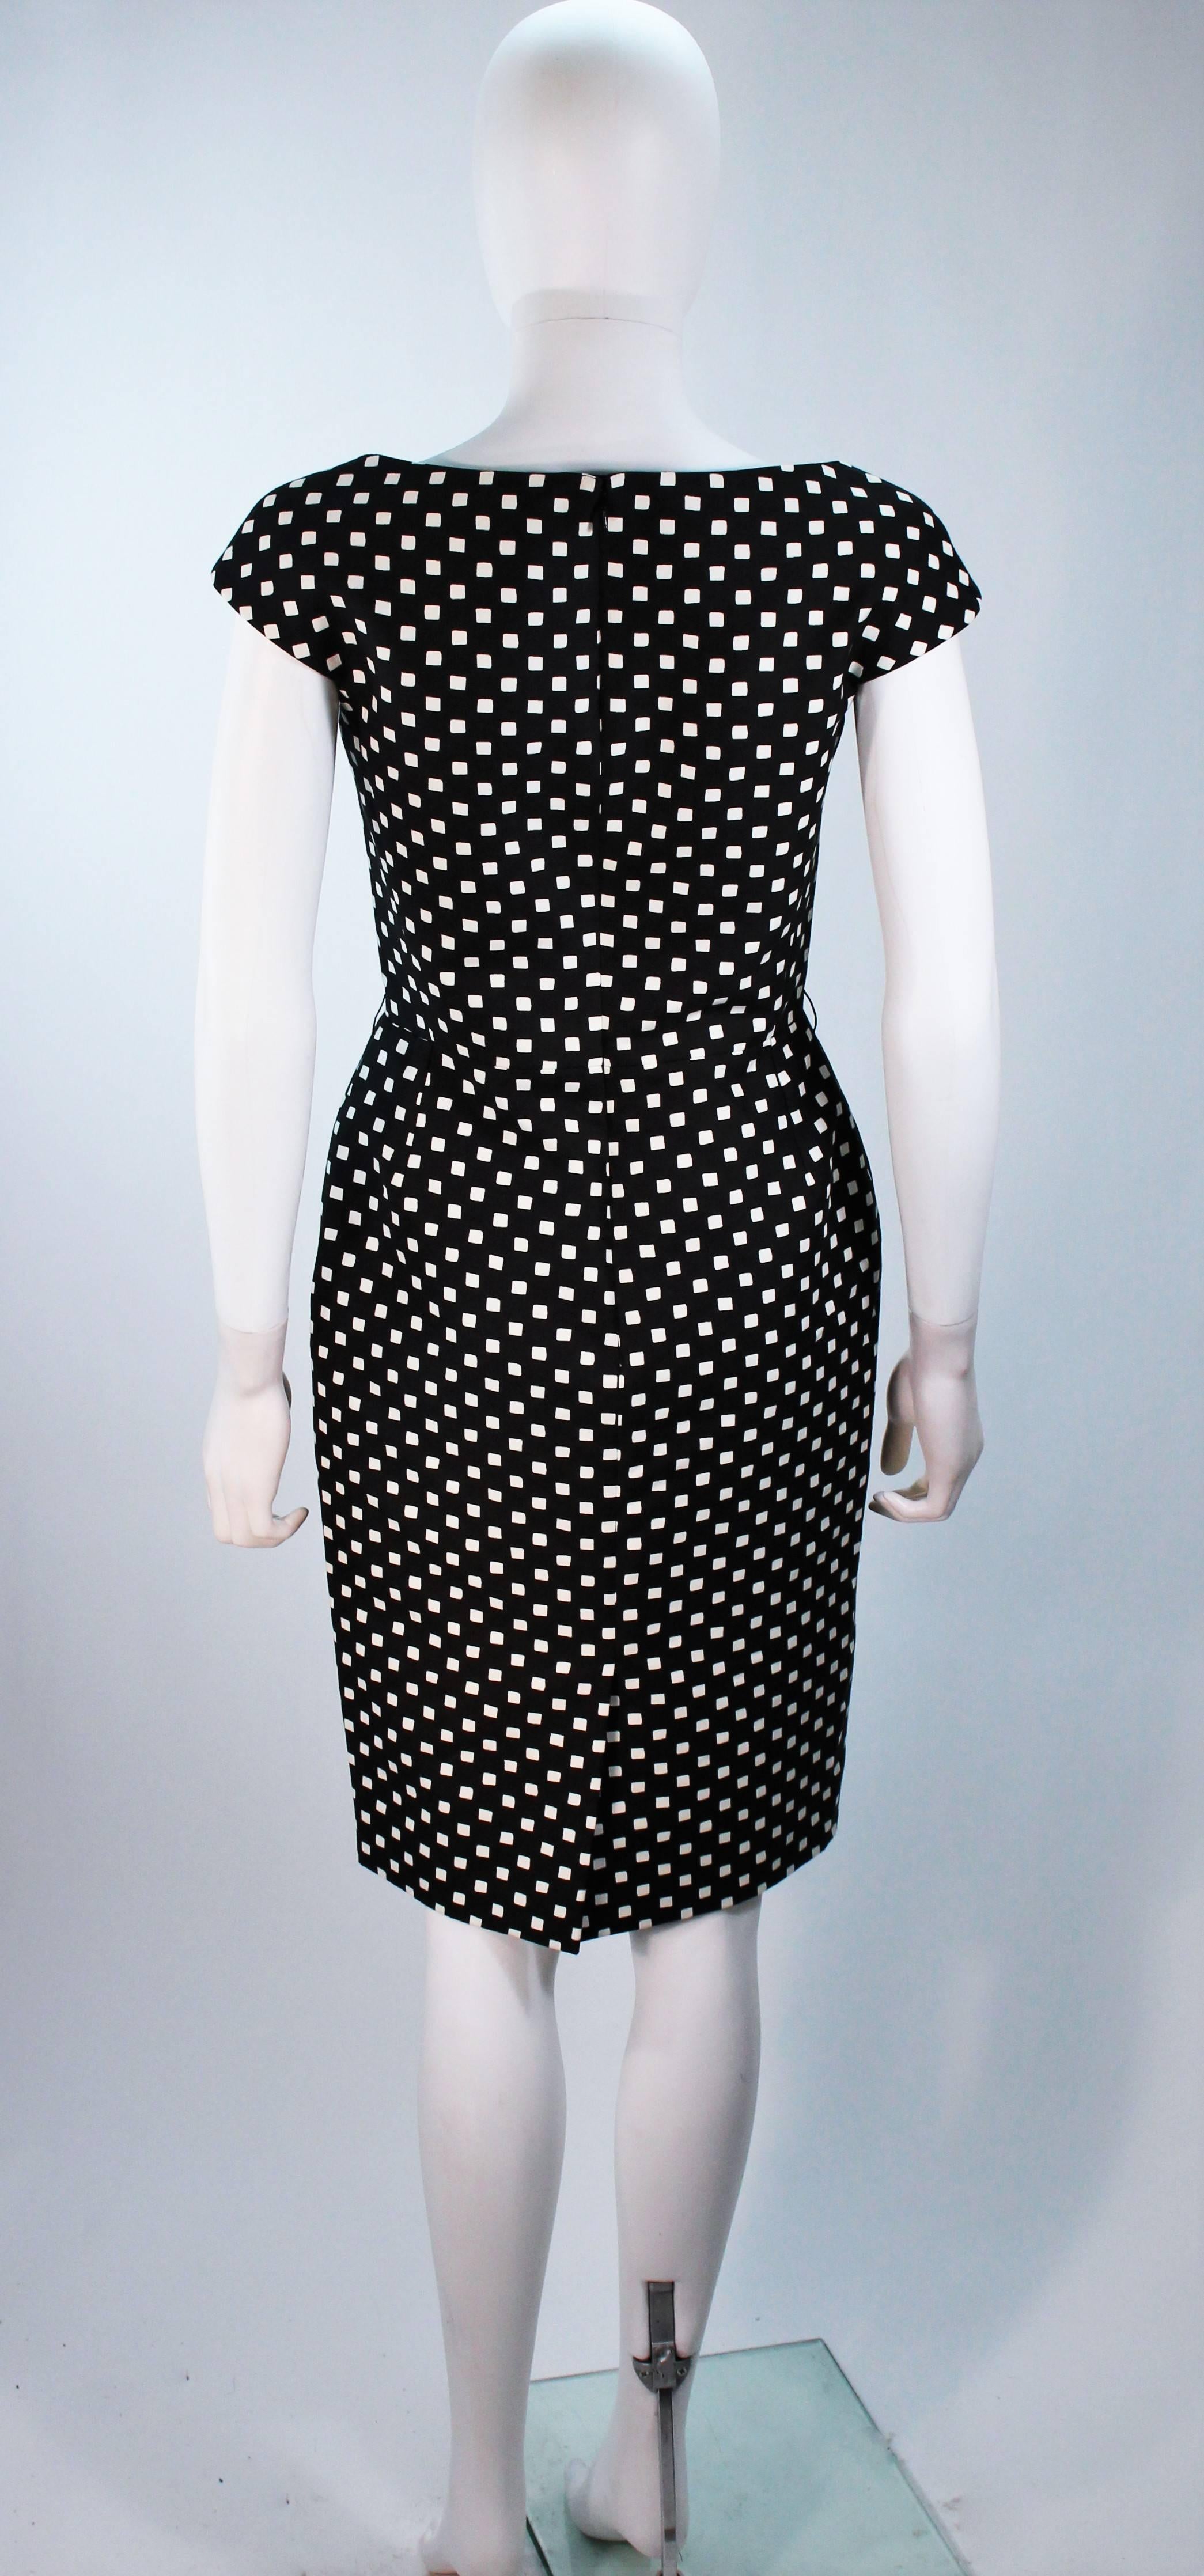 CHRISTIAN DIOR Black and White Checkered Cocktail Dress Size 42 6 5